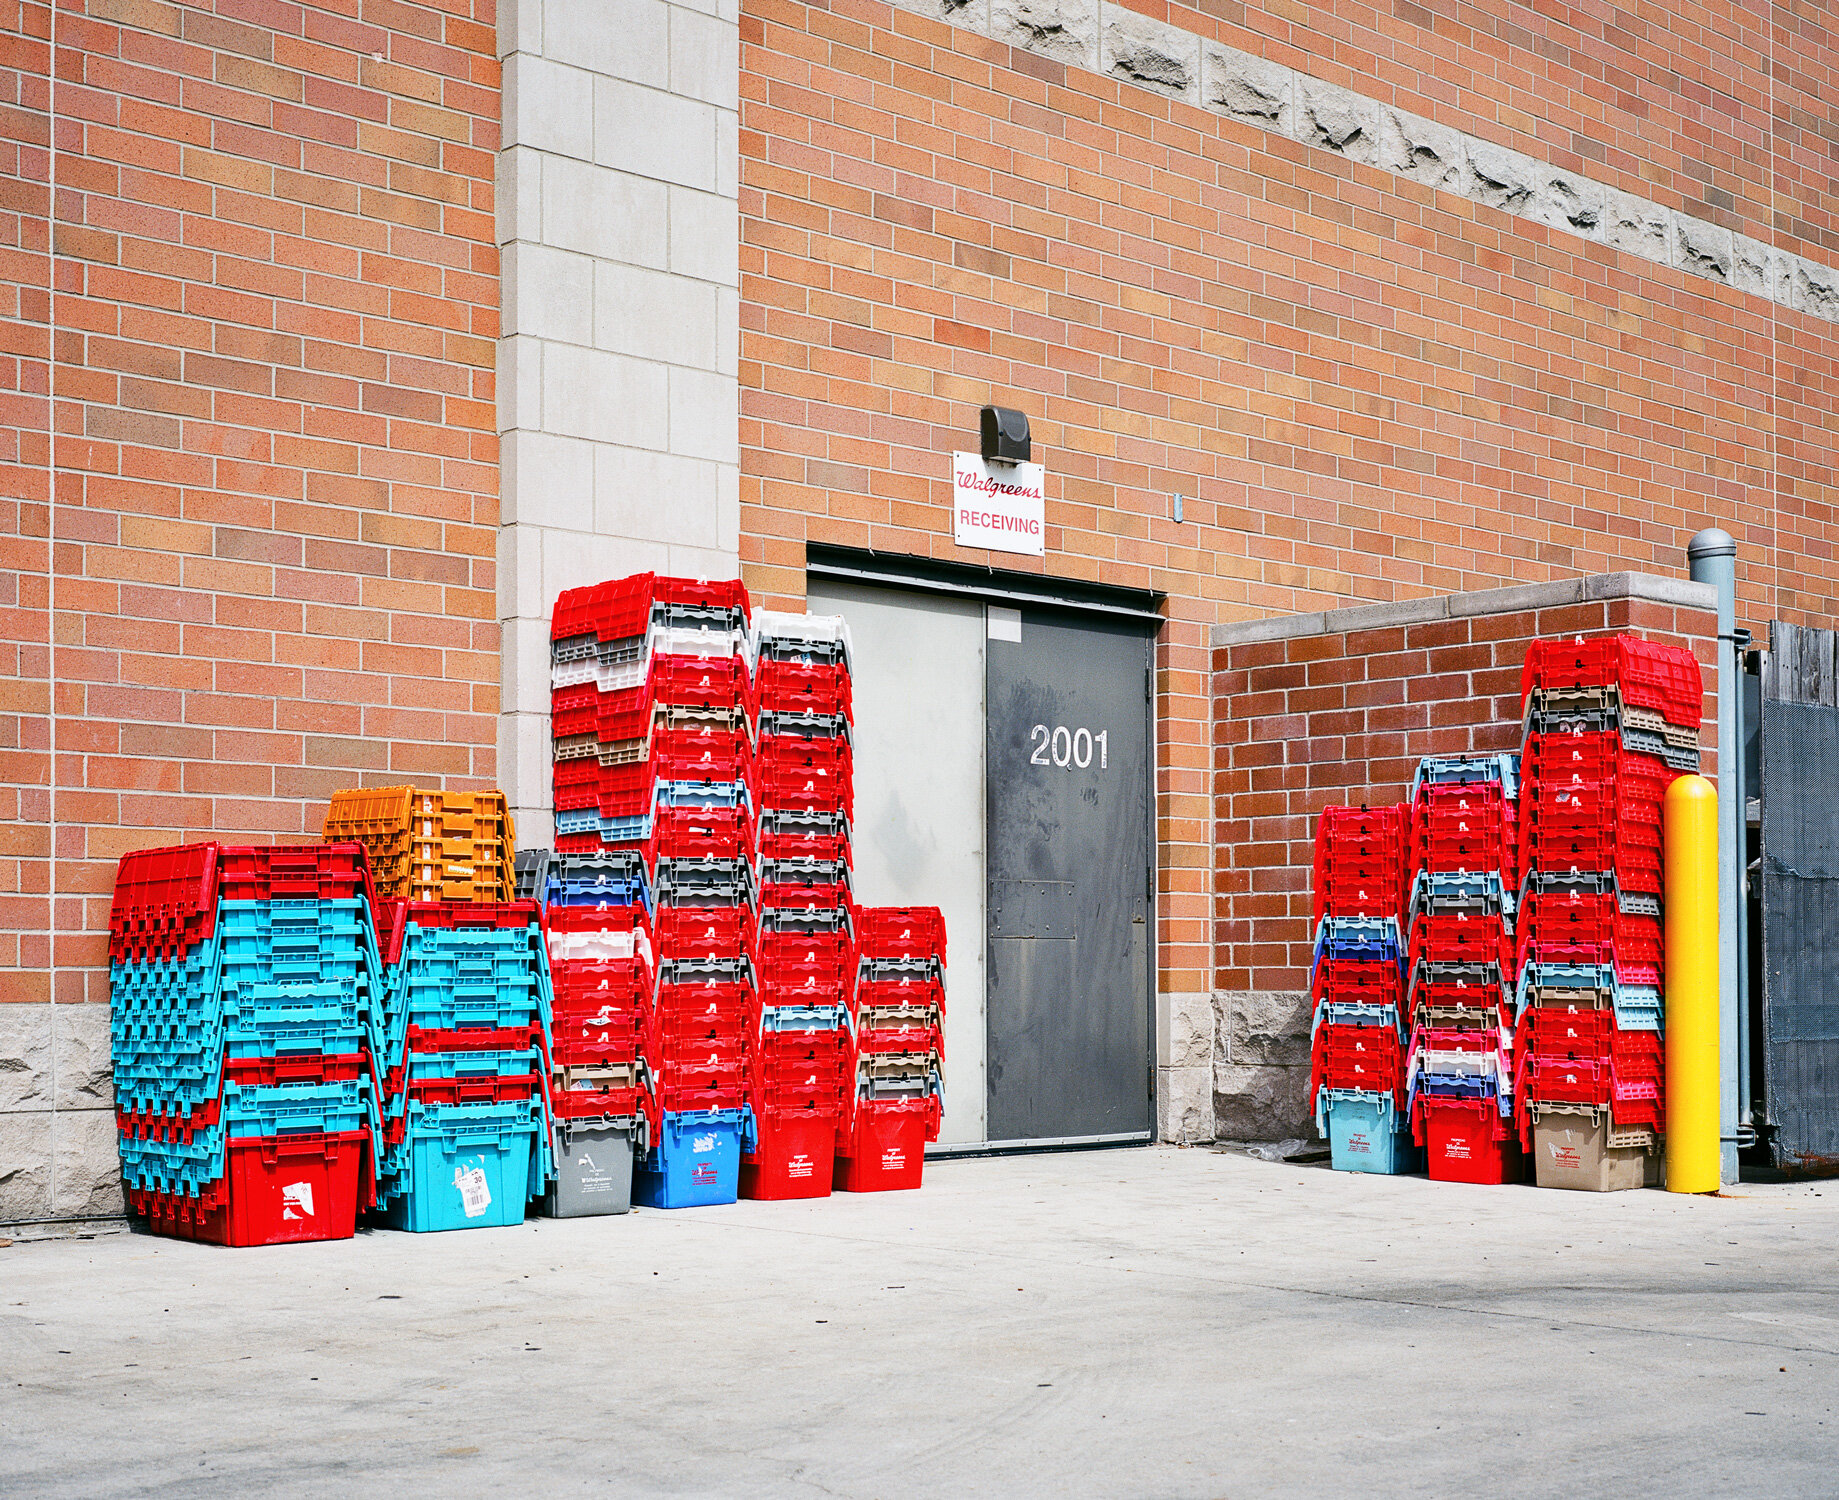 2020_08_14_Illinois_Chicago_Colorful_Baskets_RJS_000030060003.jpg